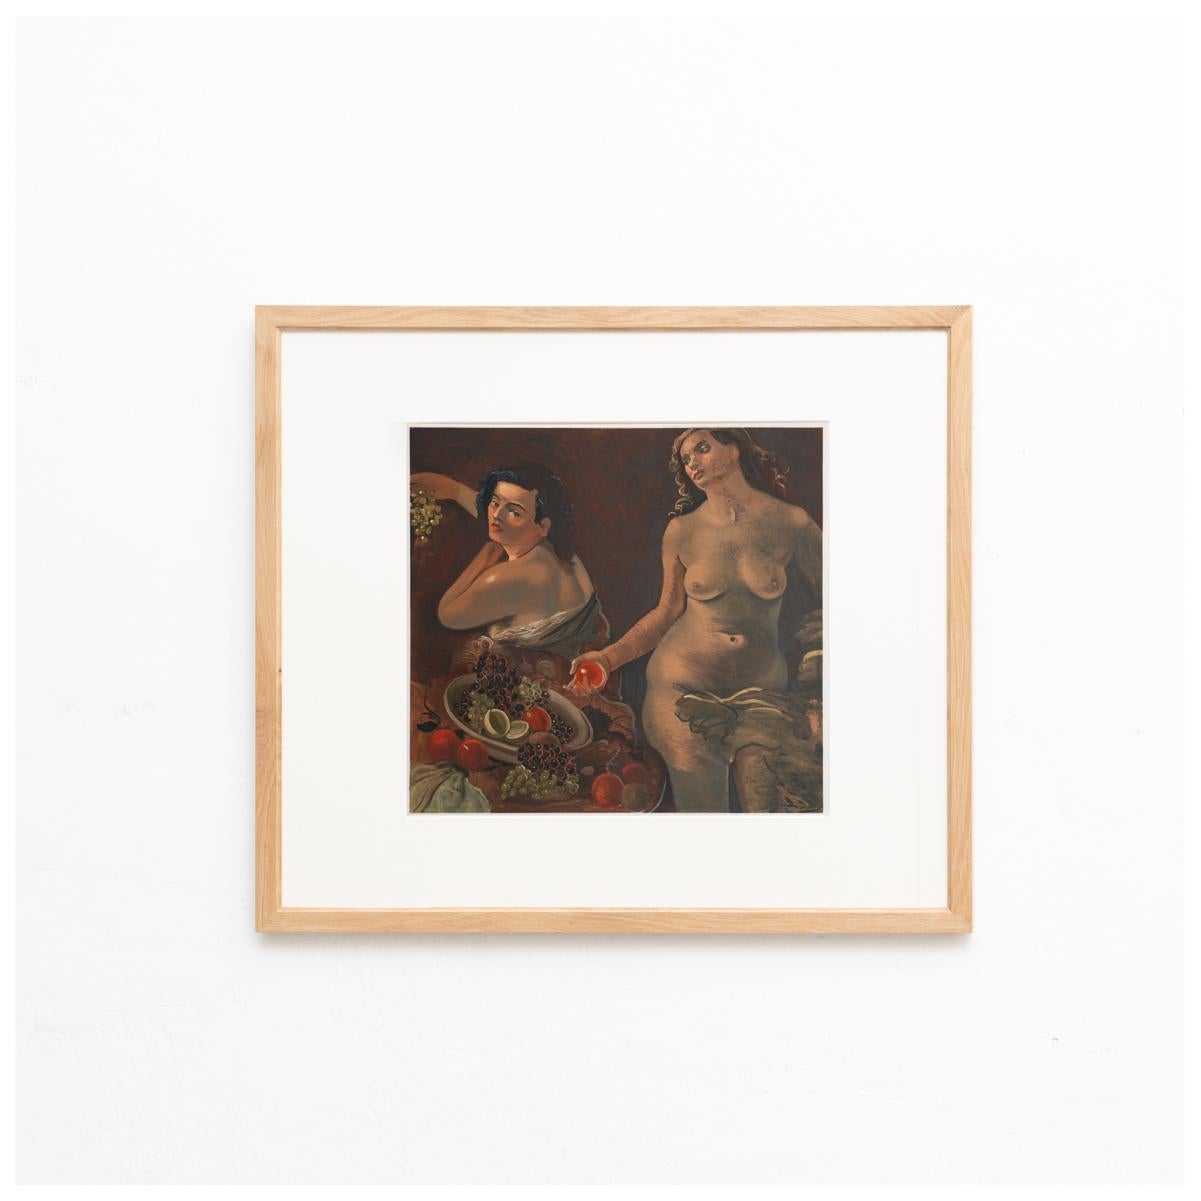 Original color lithograph 'Deux femmes nues et nature morte' by André Derain.

Lithograph printed from an original painting made by the author in France, circa 1935.

Published in France by Fernand Mourlot, circa 1970. 

Framed and signed in